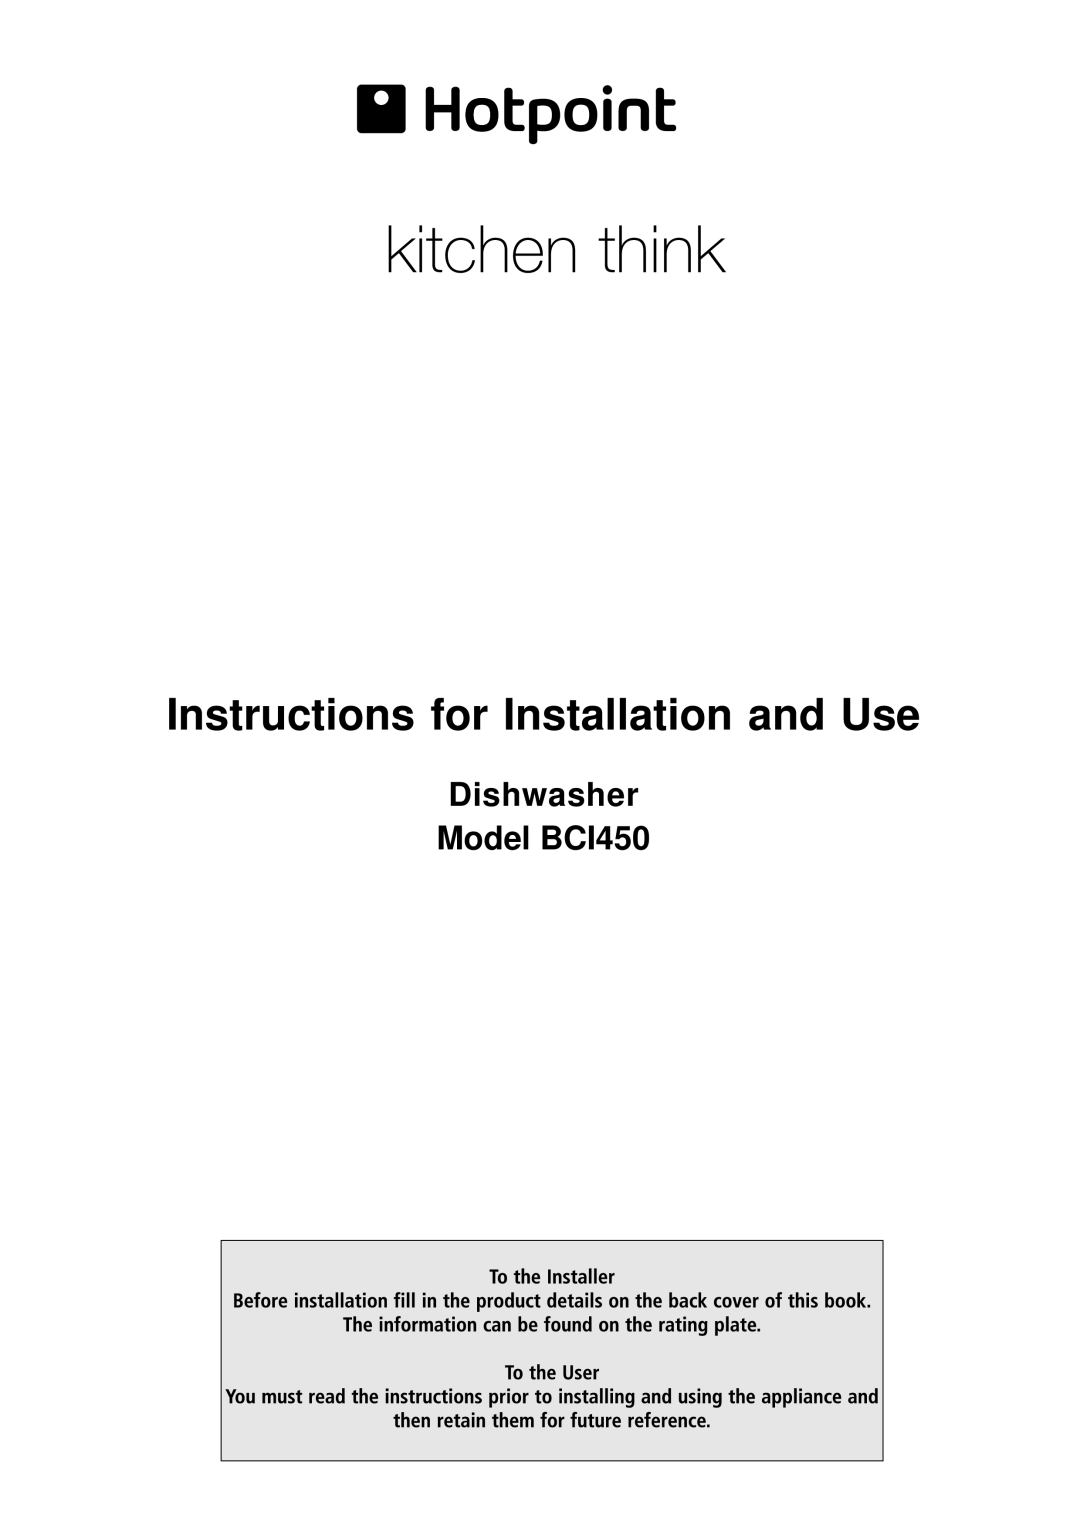 Hotpoint manual Instructions for Installation and Use, Dishwasher Model BCI450 